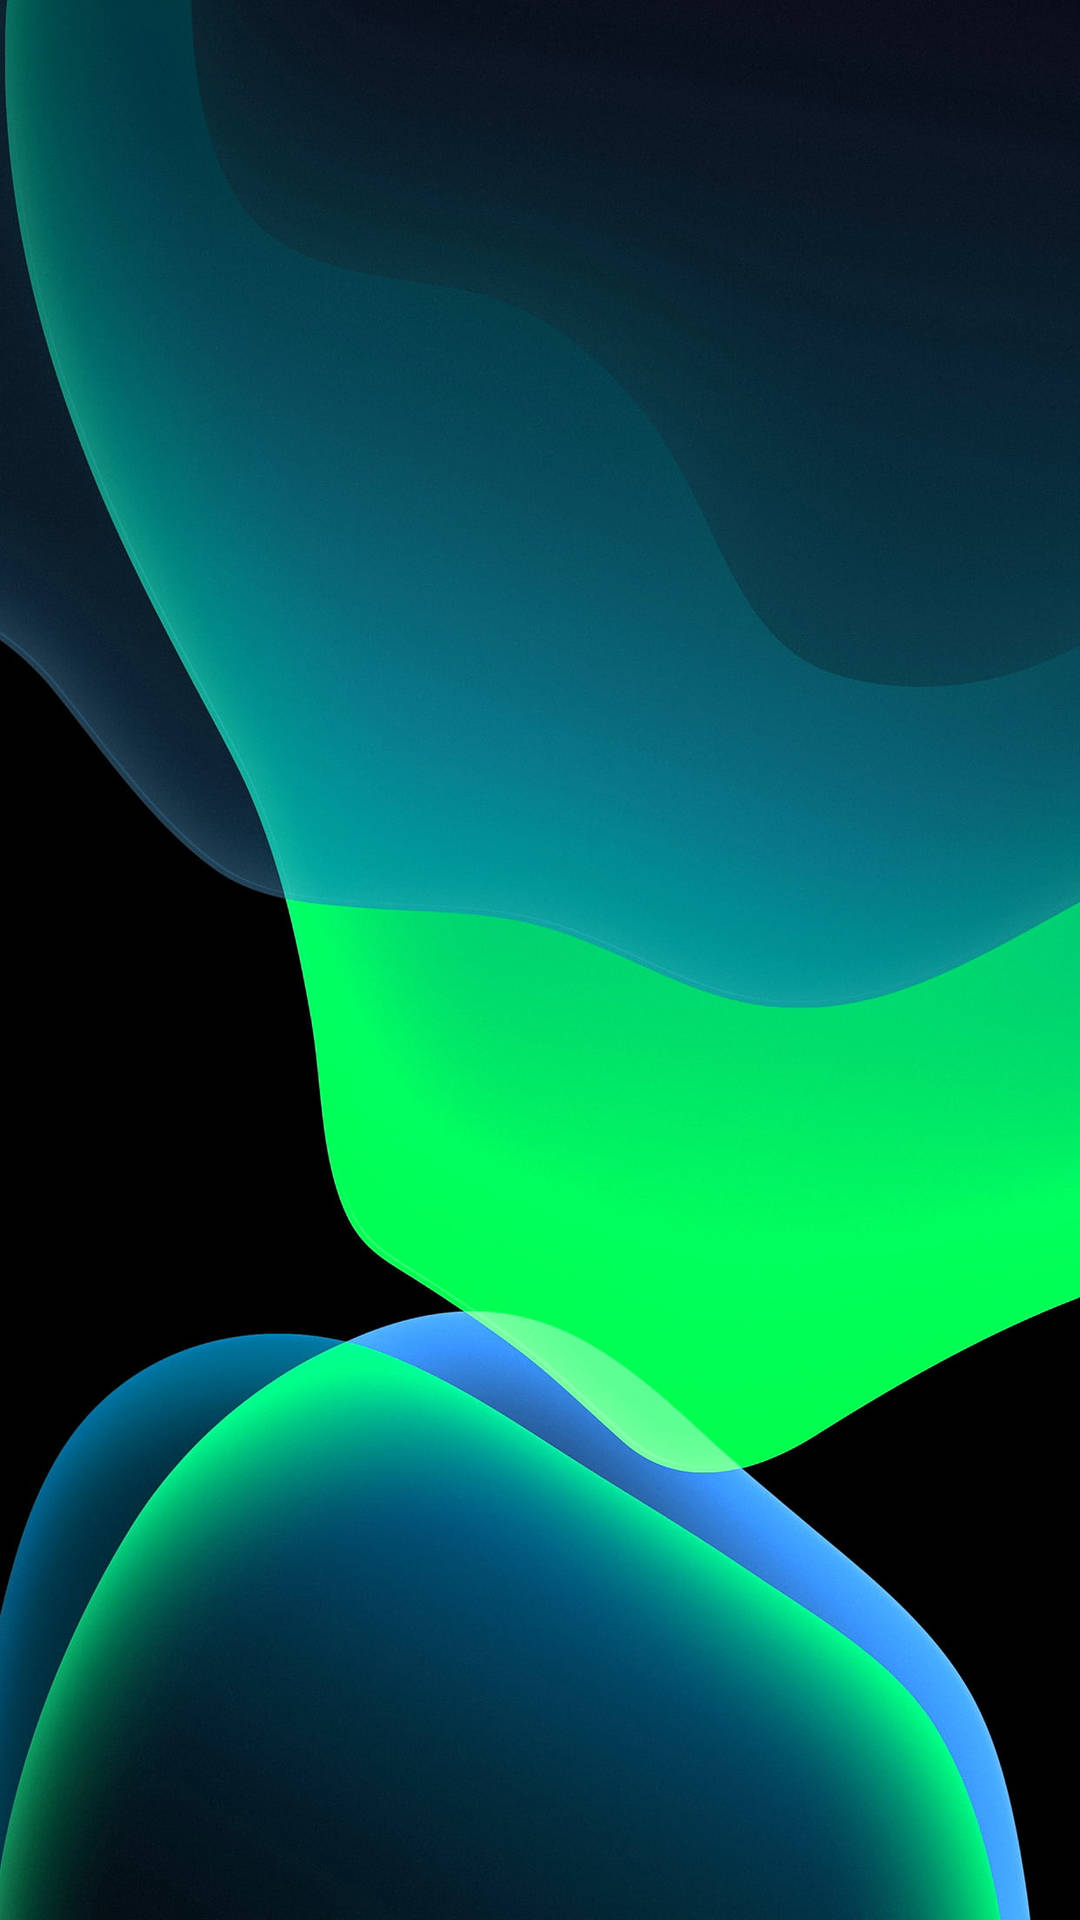 Iphone Xr Red Blue-green Blobs Background